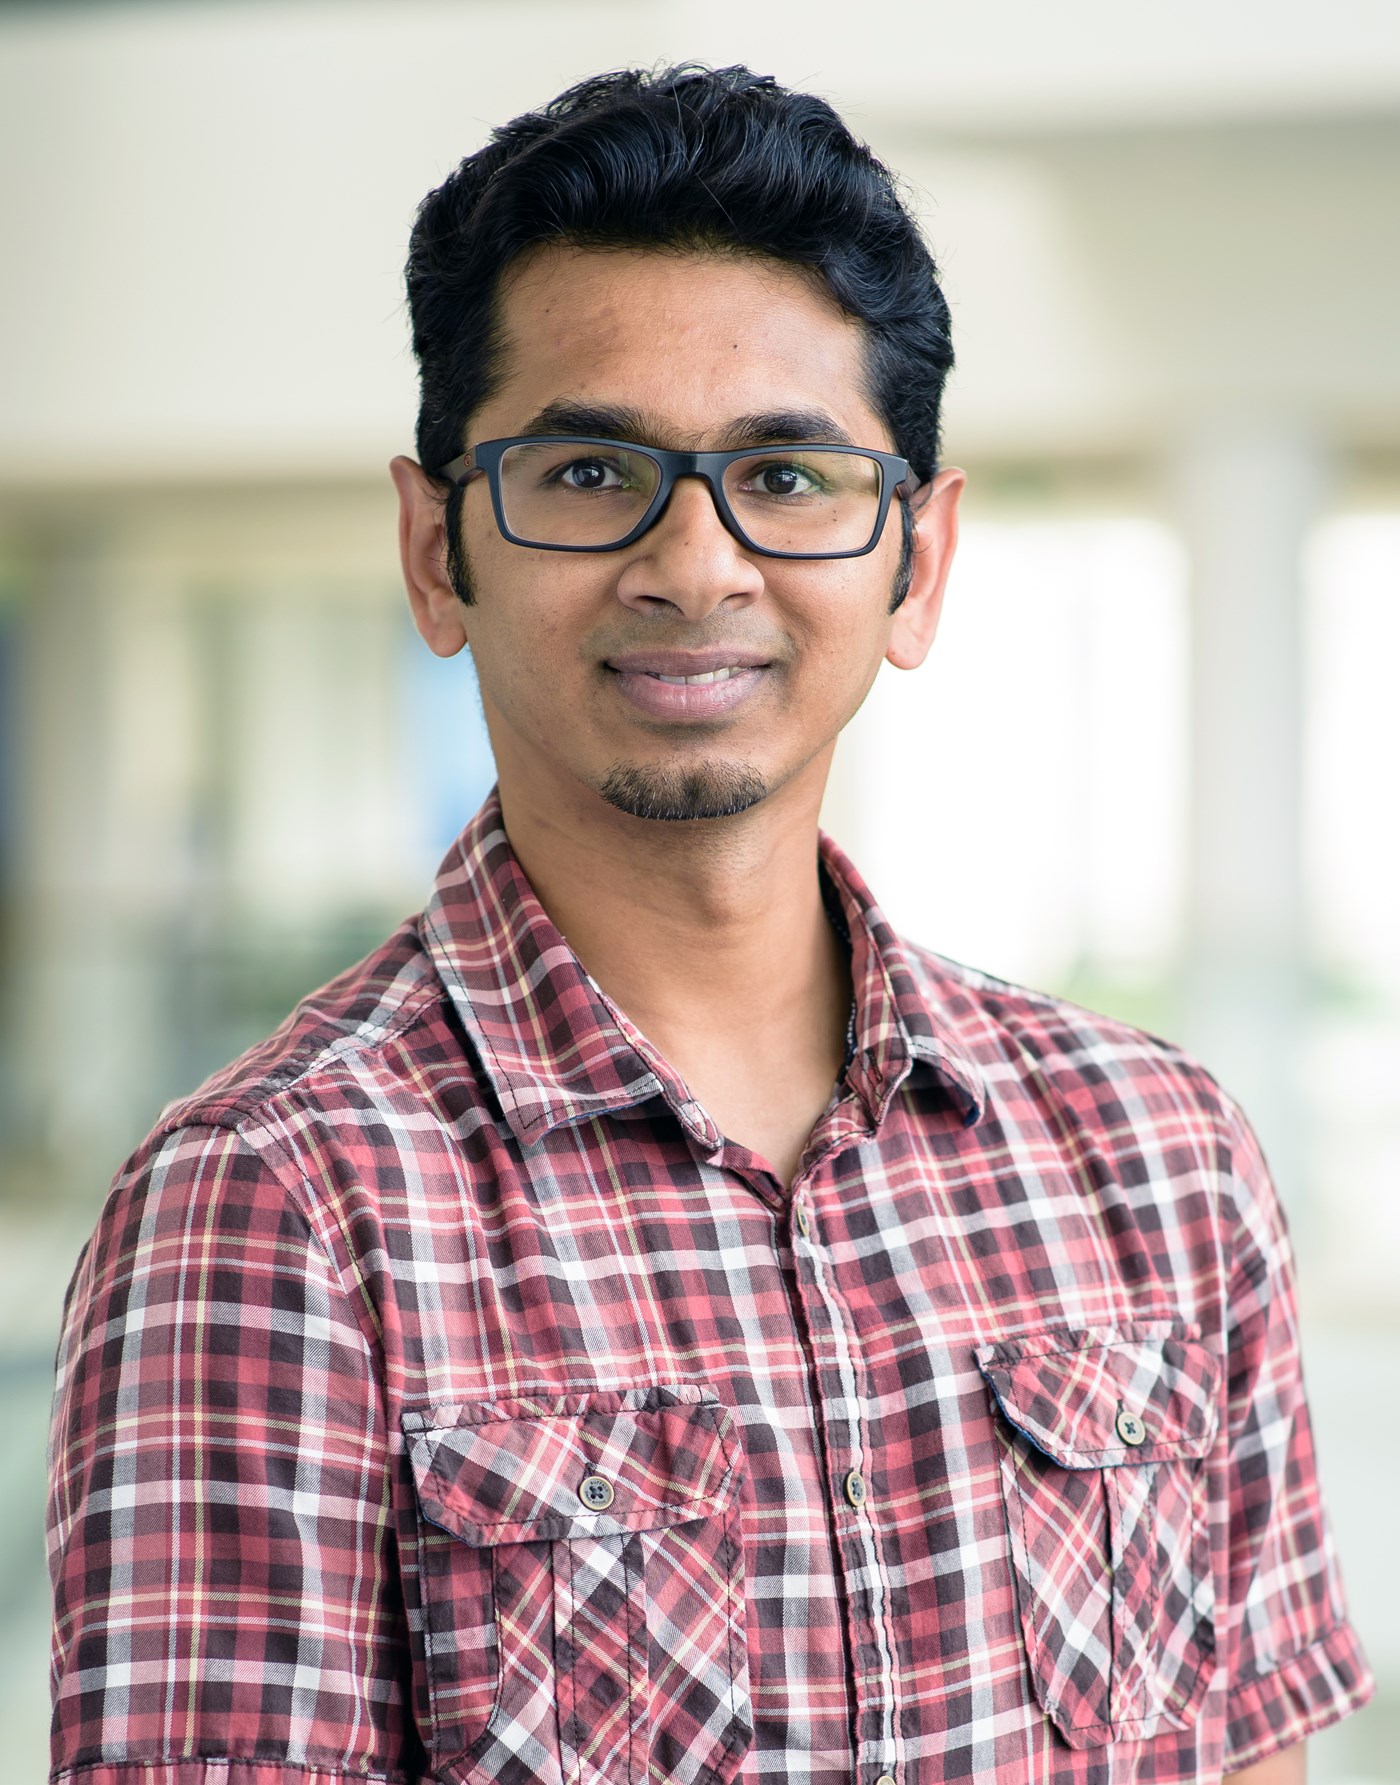 Sashank Narain is an Assistant Professor in the Computer Science Department and the iSAFER research center at UMass Lowell.